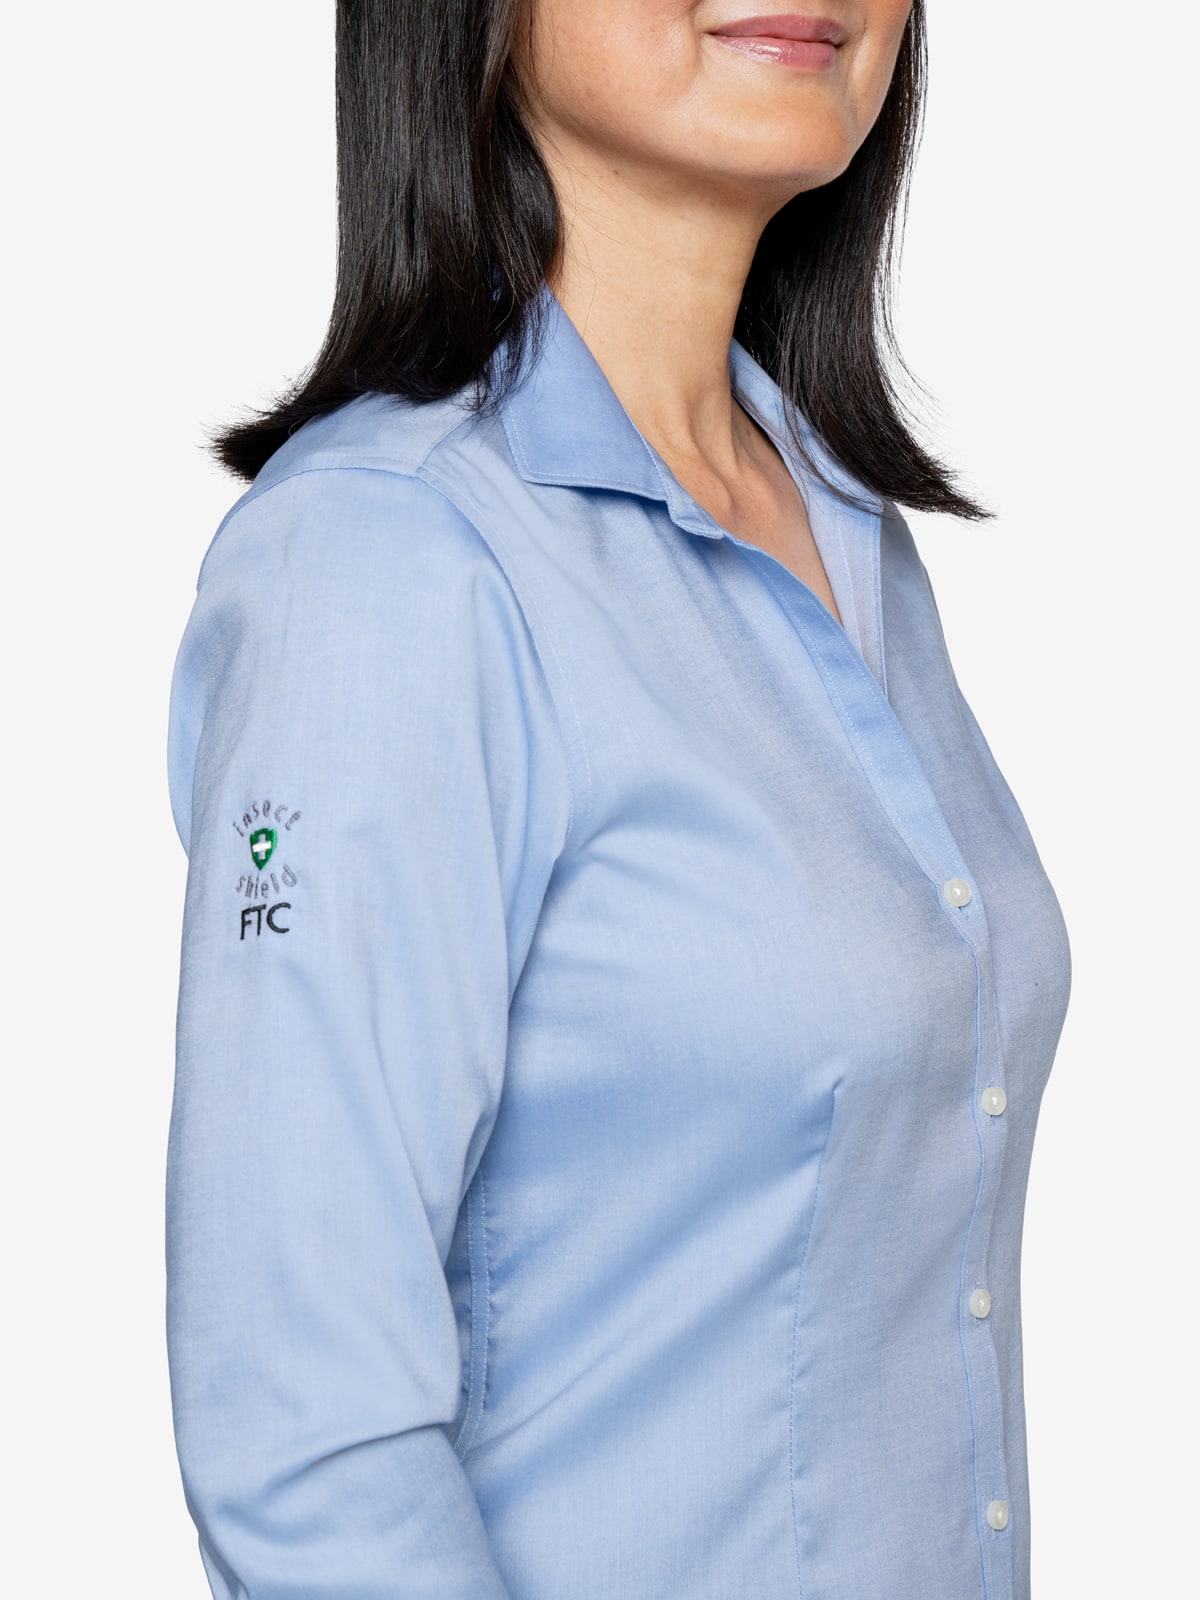 Insect Shield Women's Wrinkle-Resistant Oxford Shirt